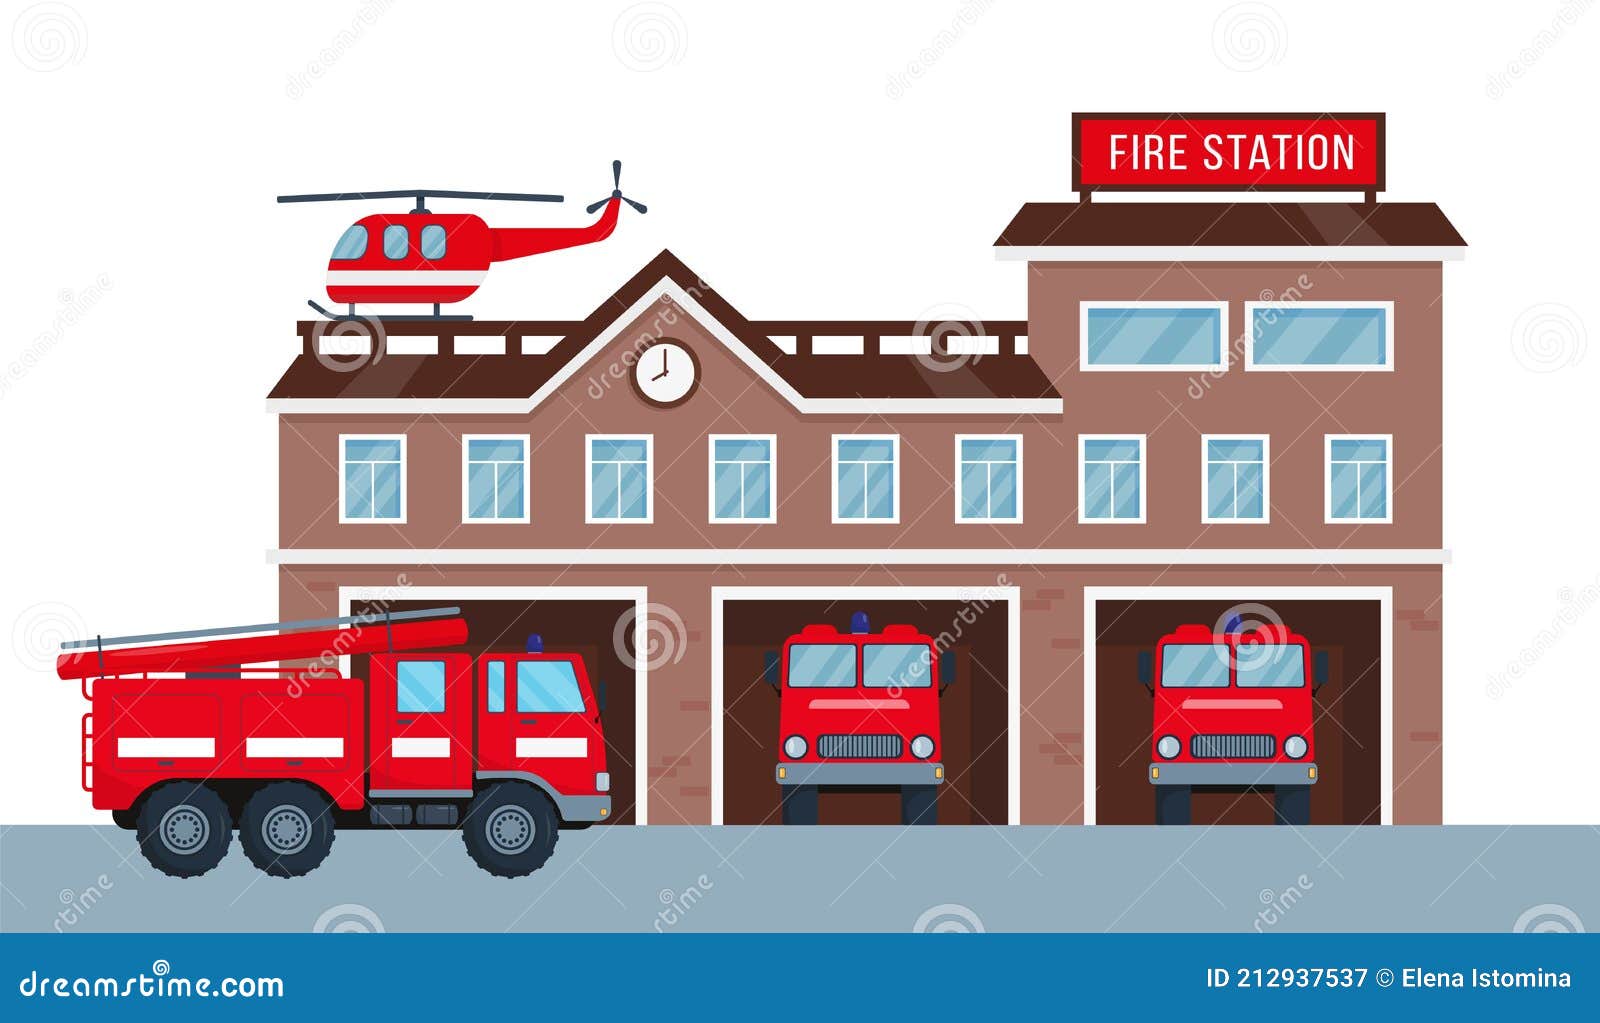 fire station building with fire engine vehicle.